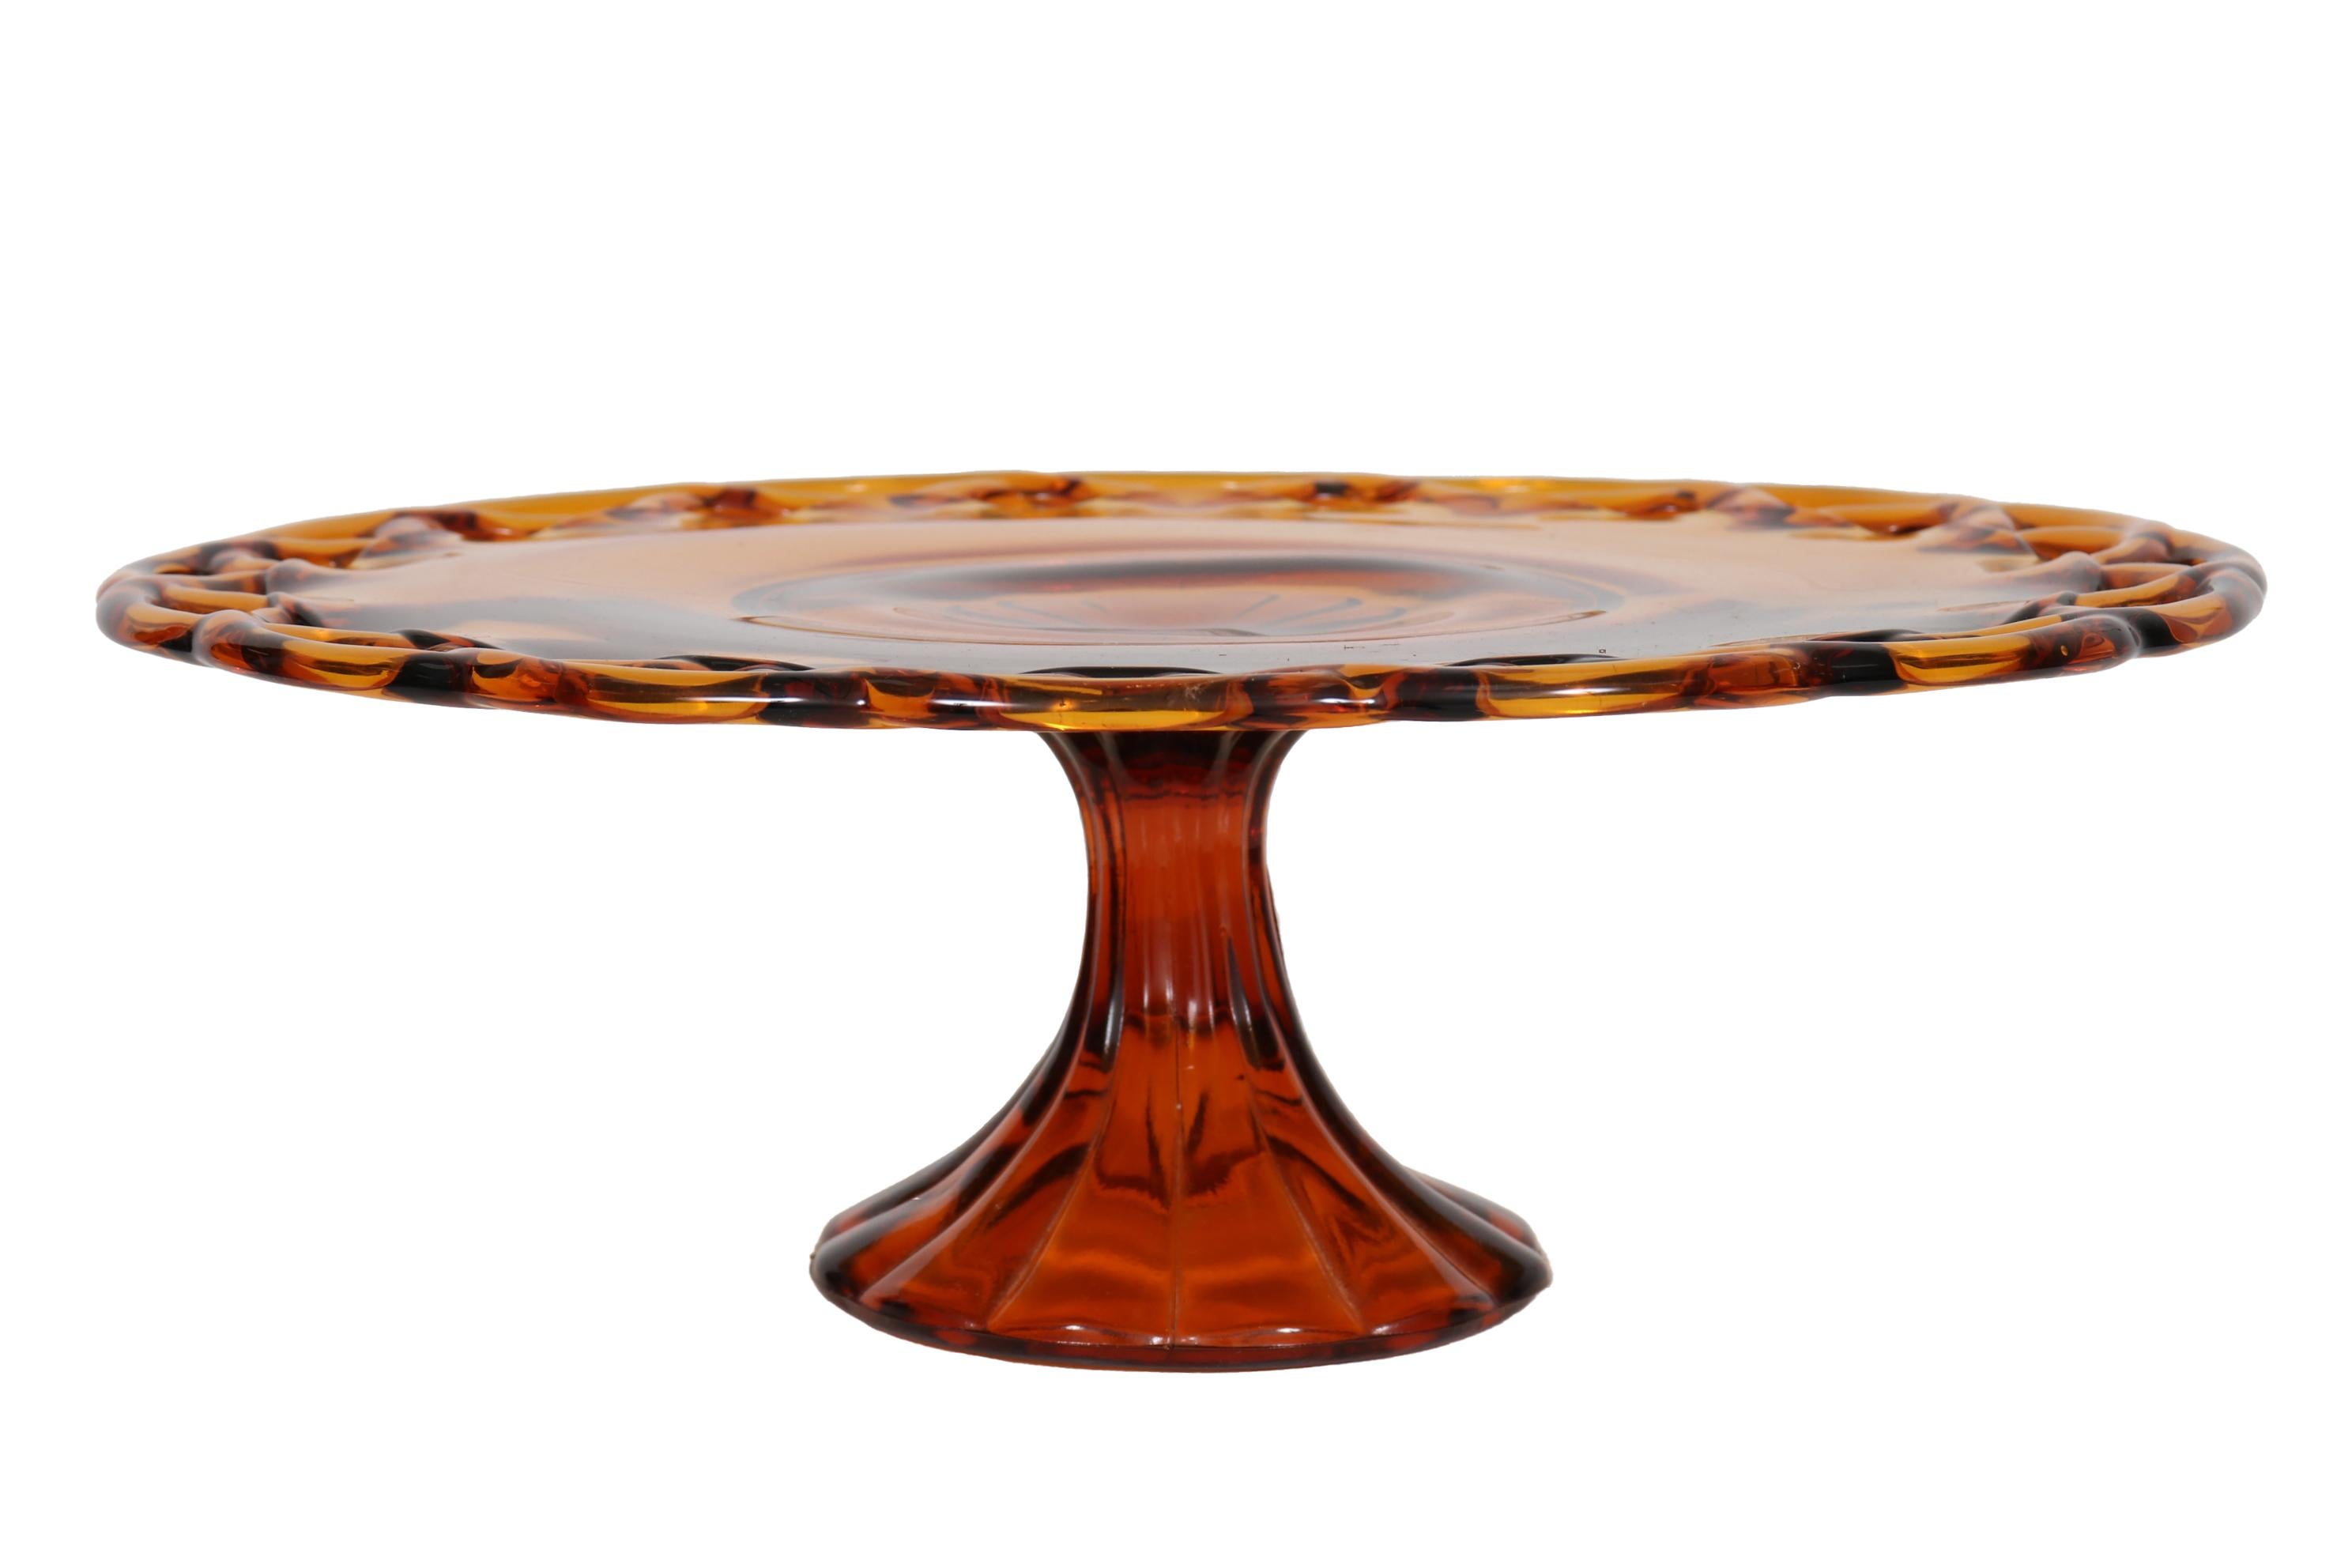 A round amber glass cake stand with a pierced braided edge. The pedestal base is reeded giving a floral center to the cake plate.